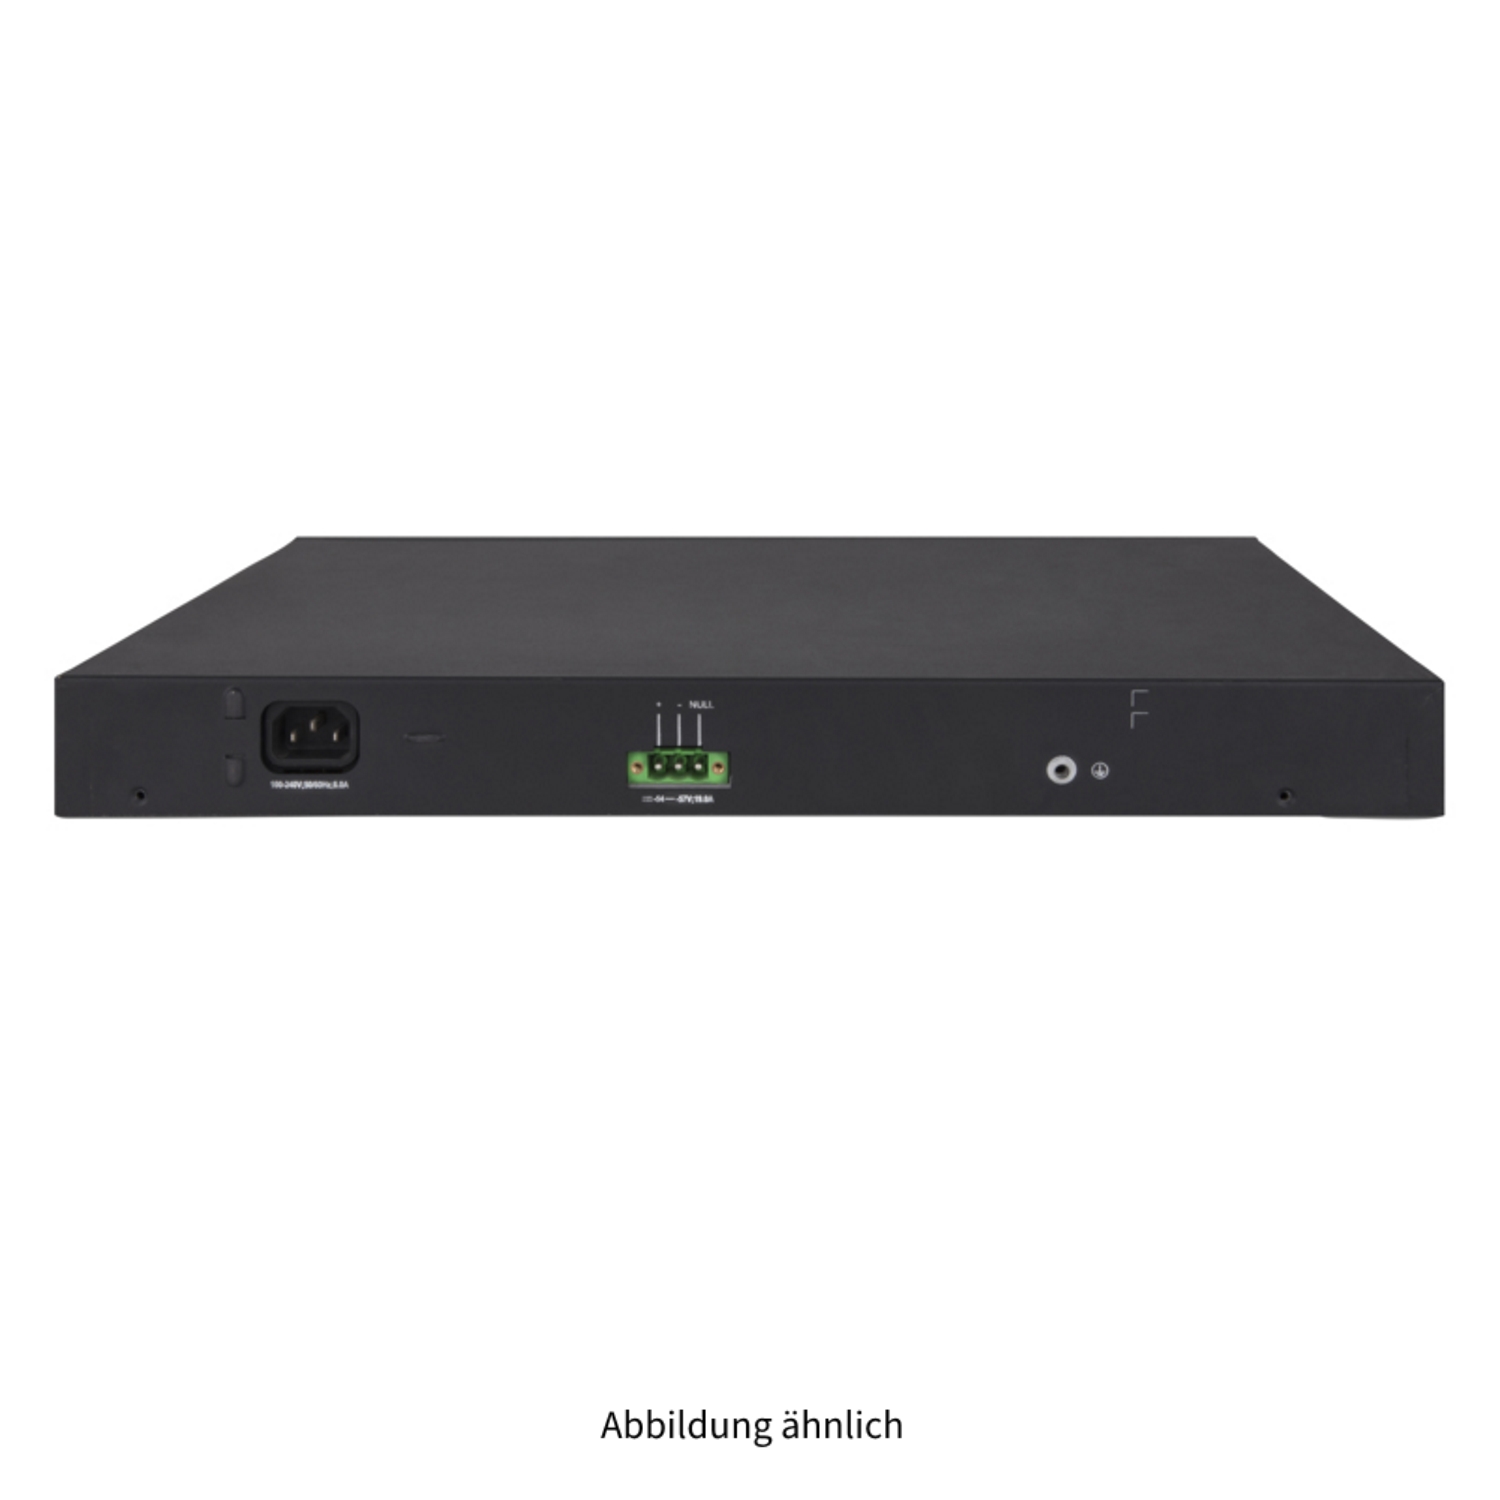 HPE OfficeConnect 1950-24G-SFP+ 24x 1000Base-T PoE+ 2x 10GBase-T 2x SFP+ Managed Switch JG962A